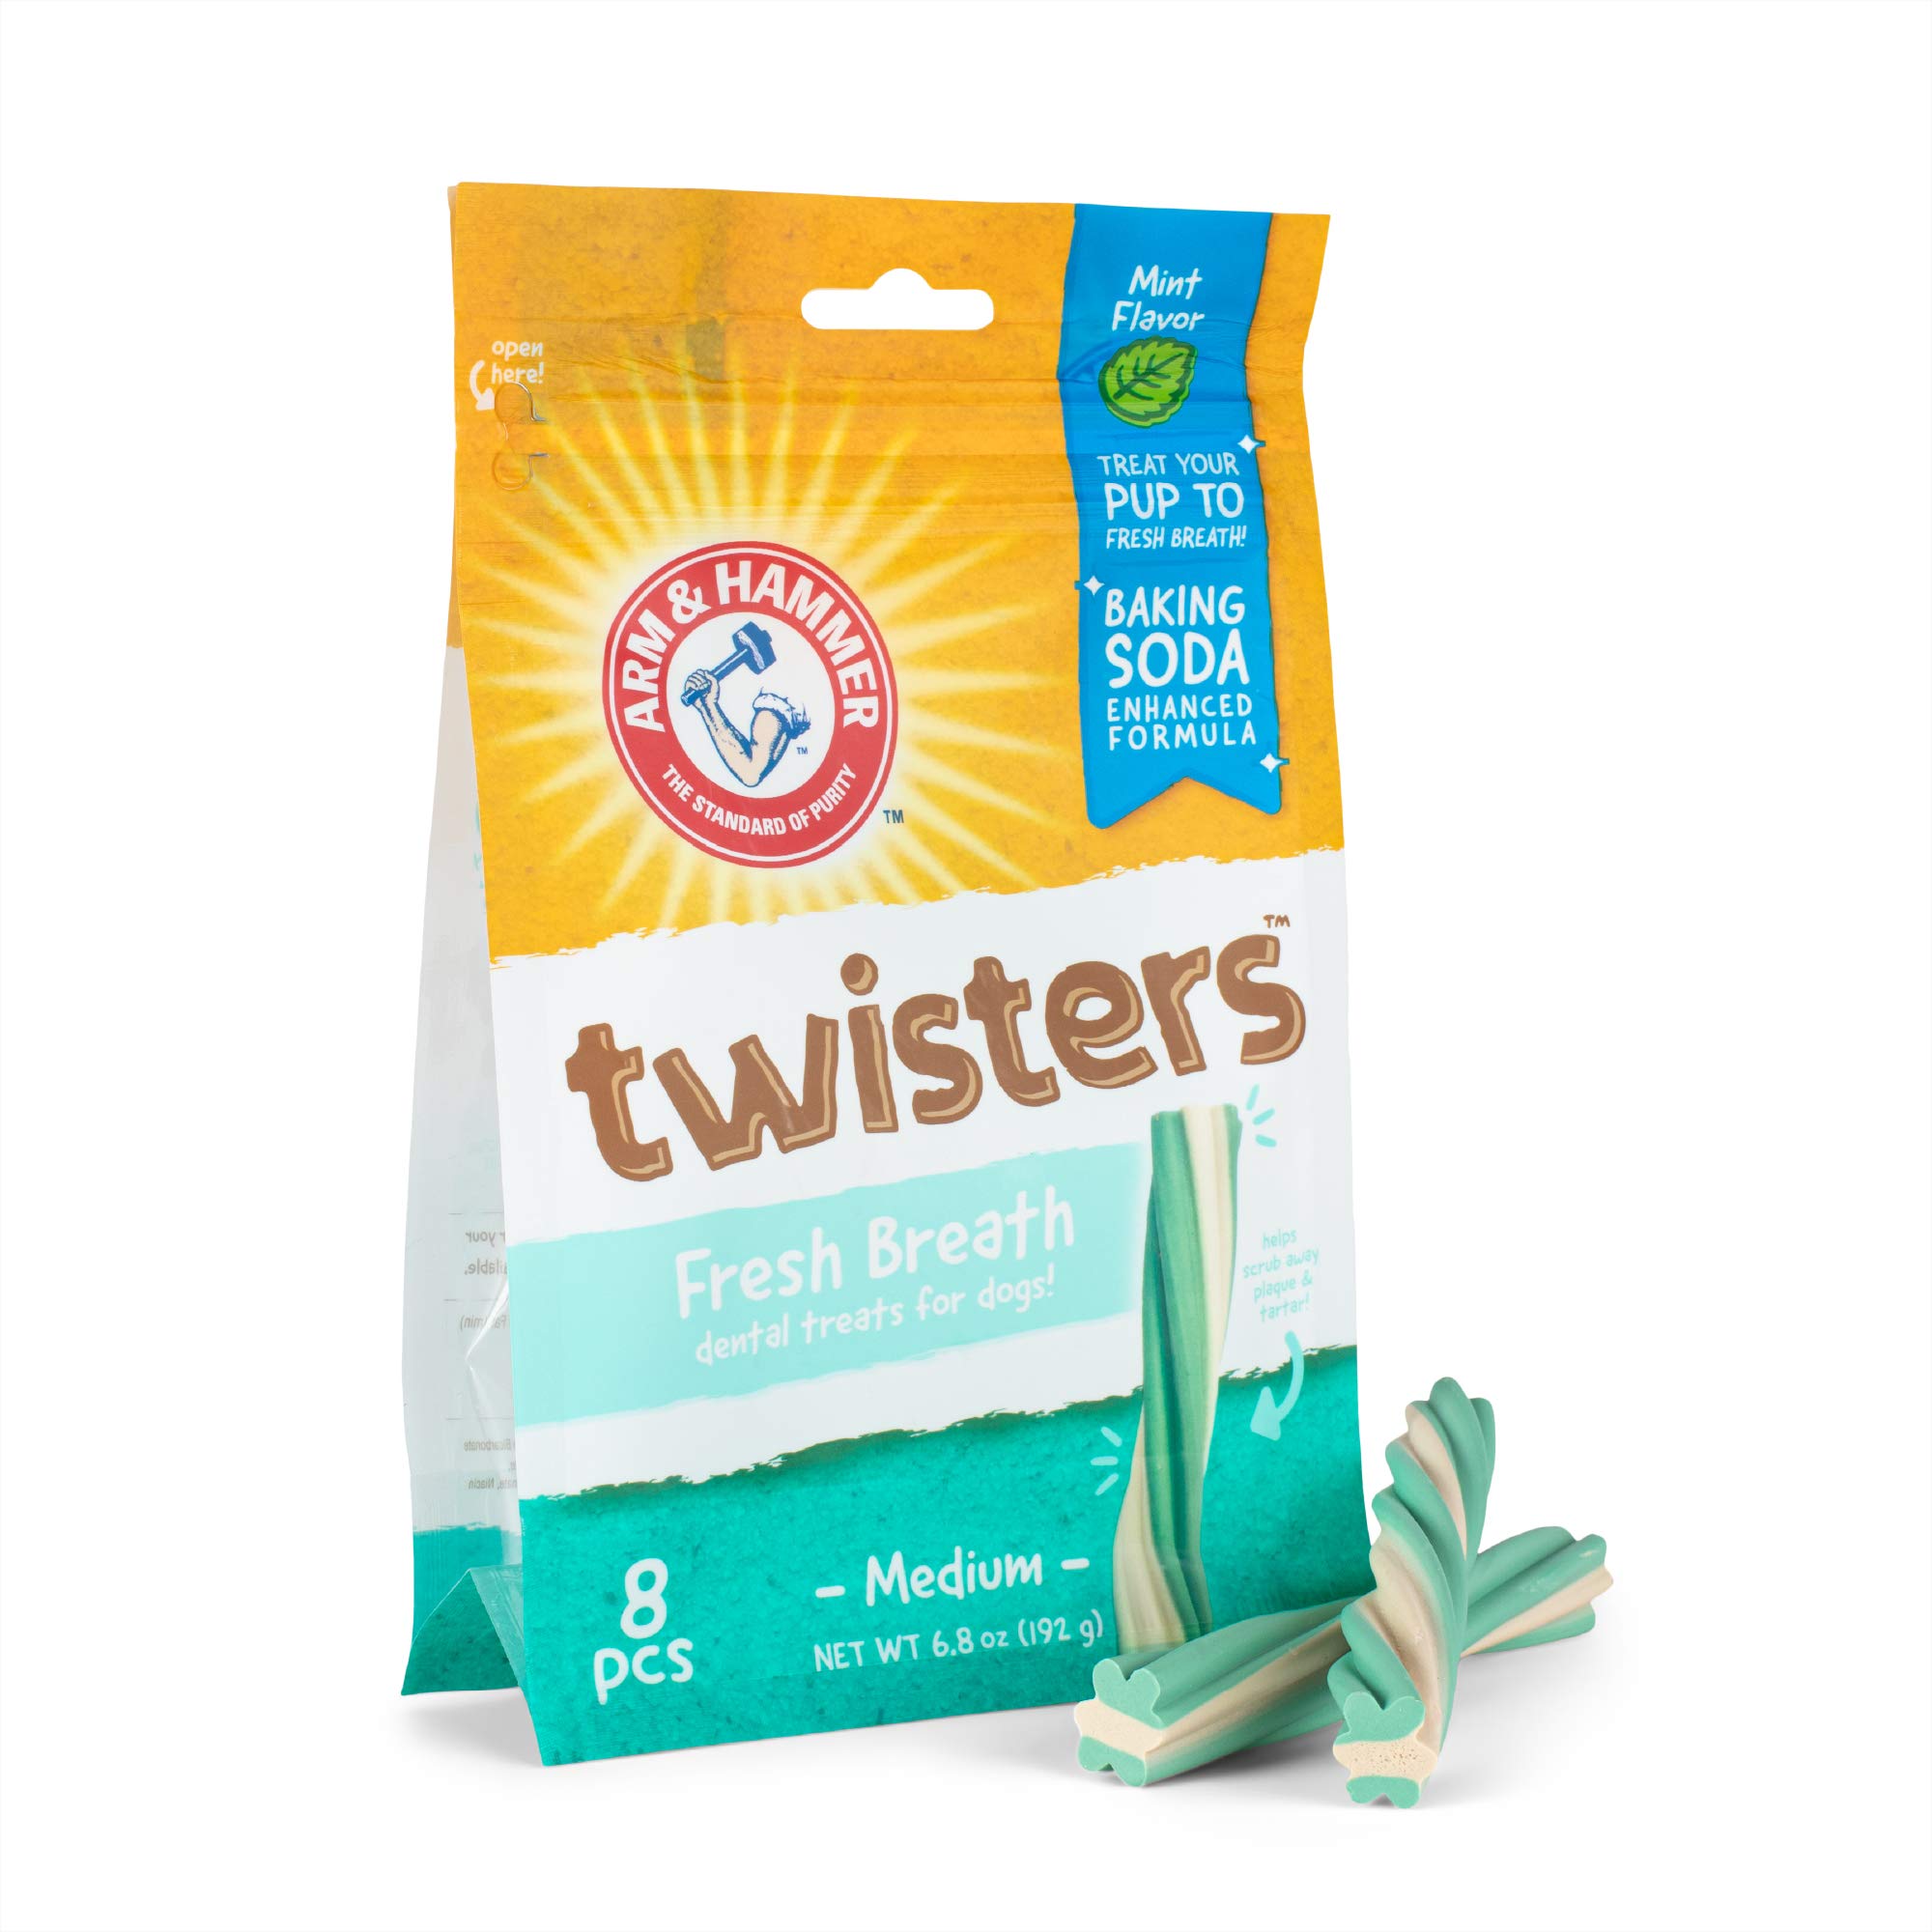 Book Cover Arm & Hammer: Twisters Fresh Breath Dental Treats for Dogs